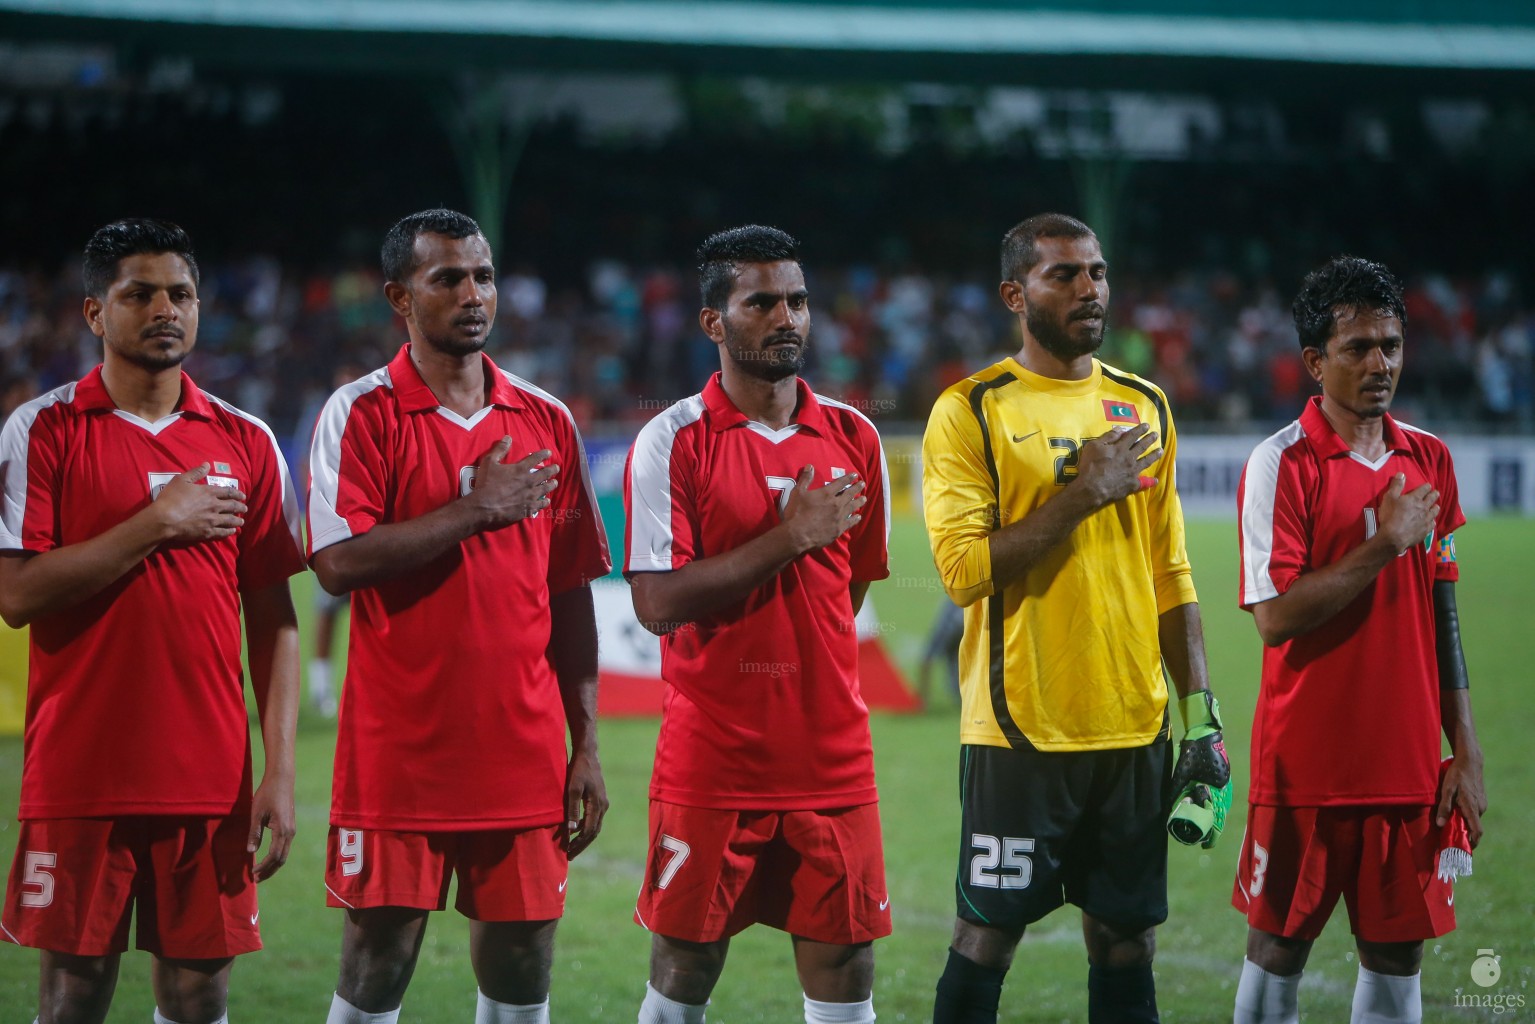 Twitsal tournament organized by twitter users of Maldivesin Male', Maldives, Friday, August. 26 , 2016. (Images.mv Photo/ Mohamed Sharuhaan).